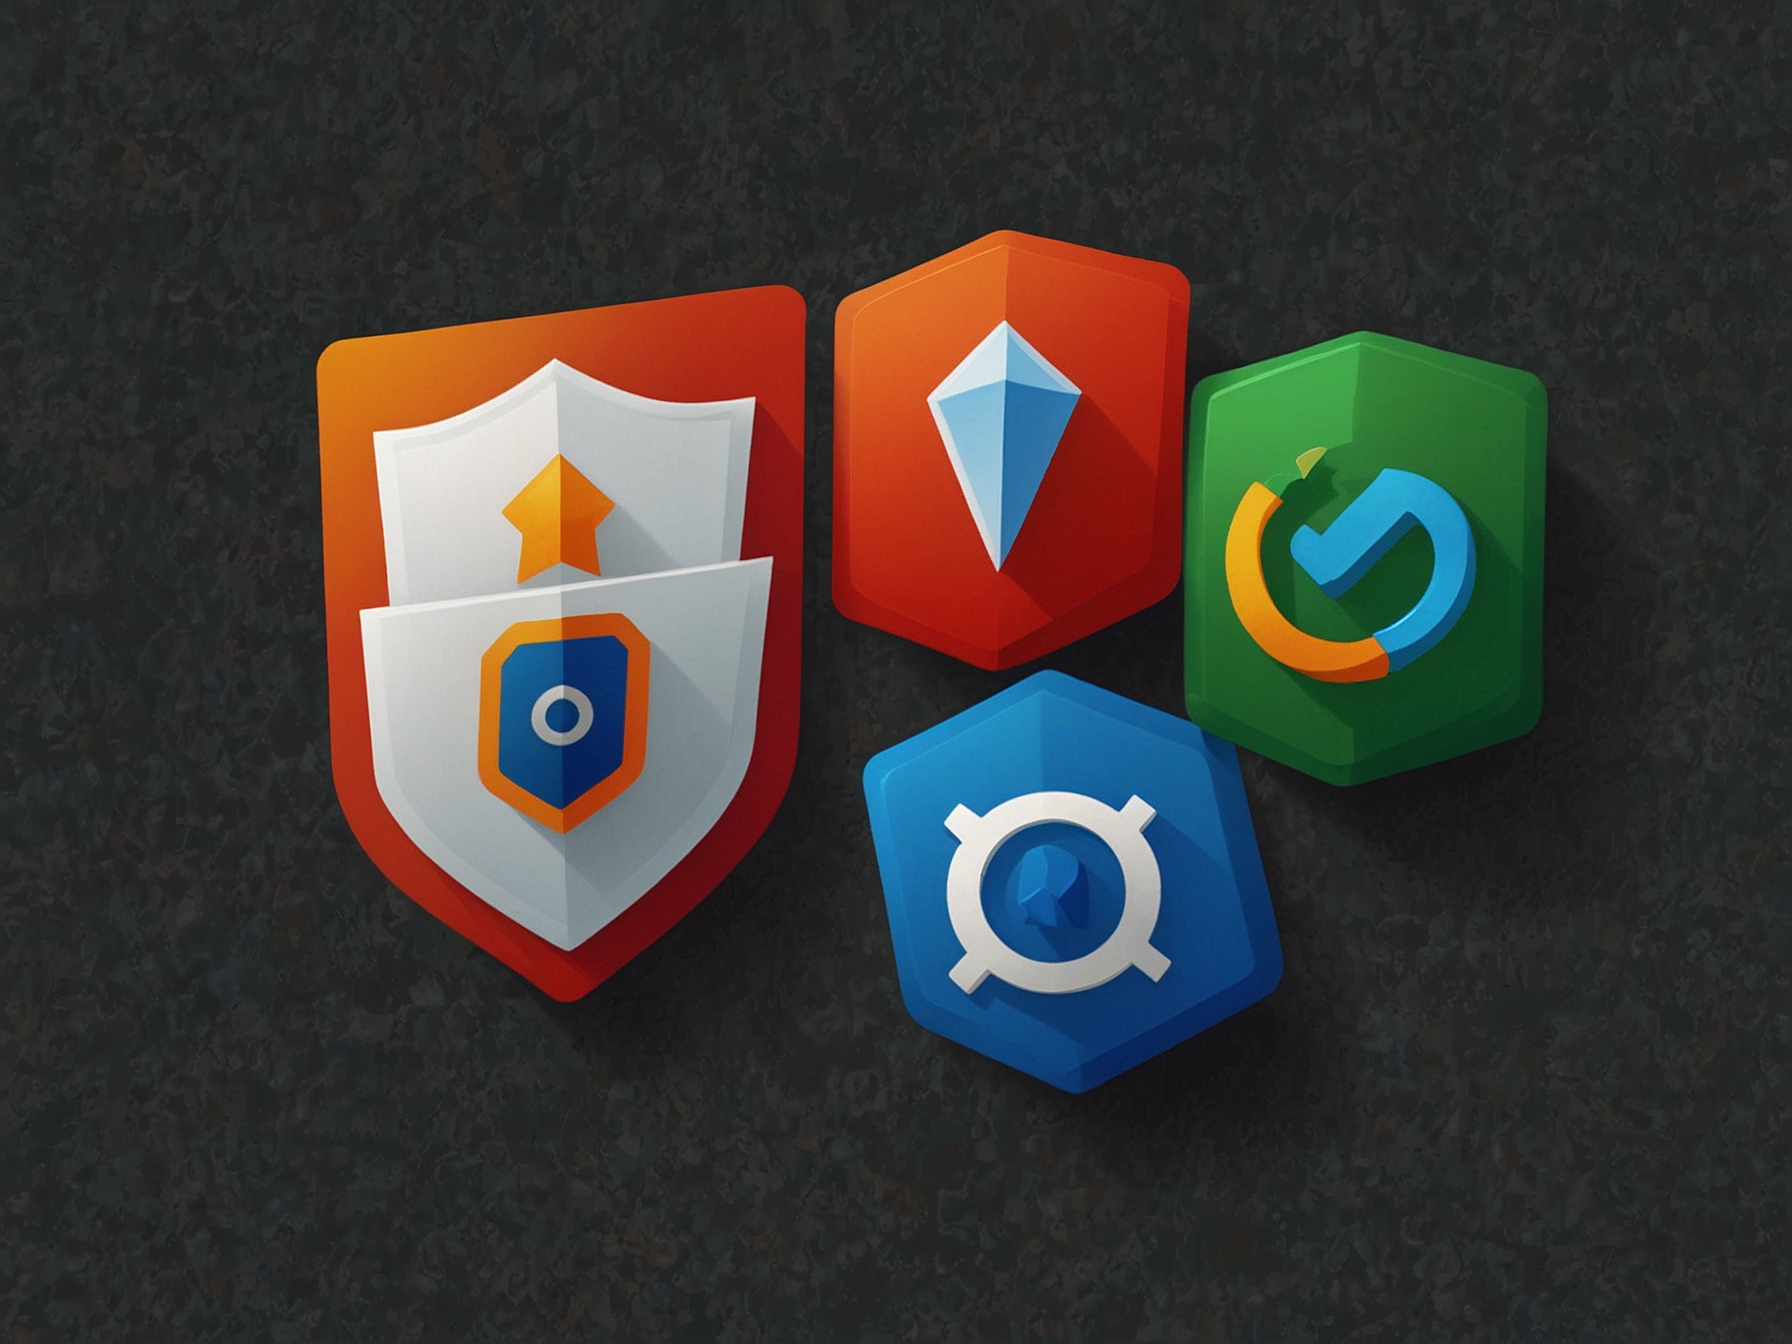 A collage of five password manager logos: Dashlane, 1Password, Bitwarden, Keeper, and NordPass. This represents the top alternatives to LastPass in the article.